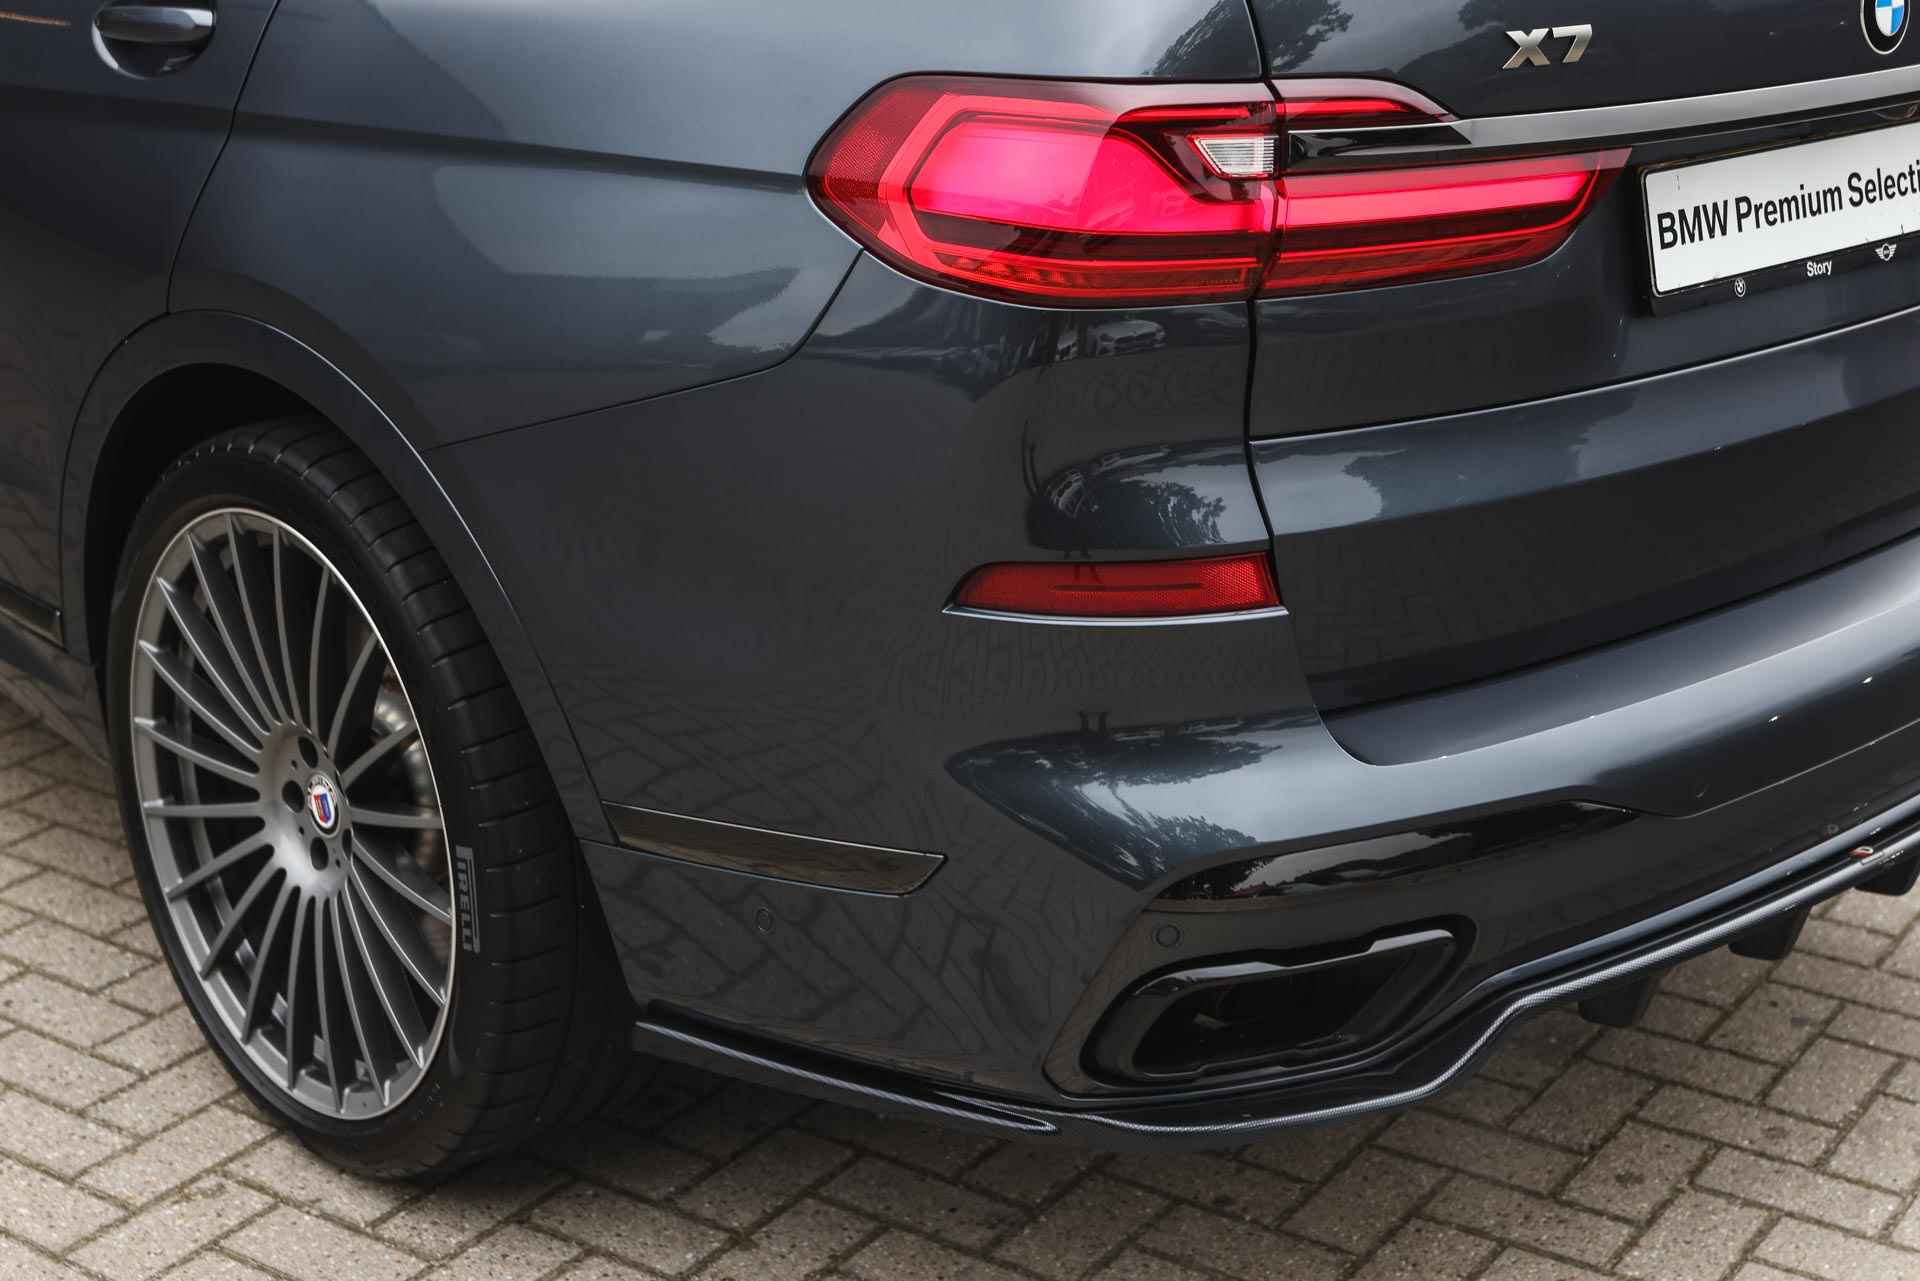 BMW X7 M50i High Executive Automaat / Active Steering / Stoelventilatie / Laserlight / Soft Close / Head-Up / Gesture Control / Parking Assistant Plus / Alpina wielen 23 inch - 50/56